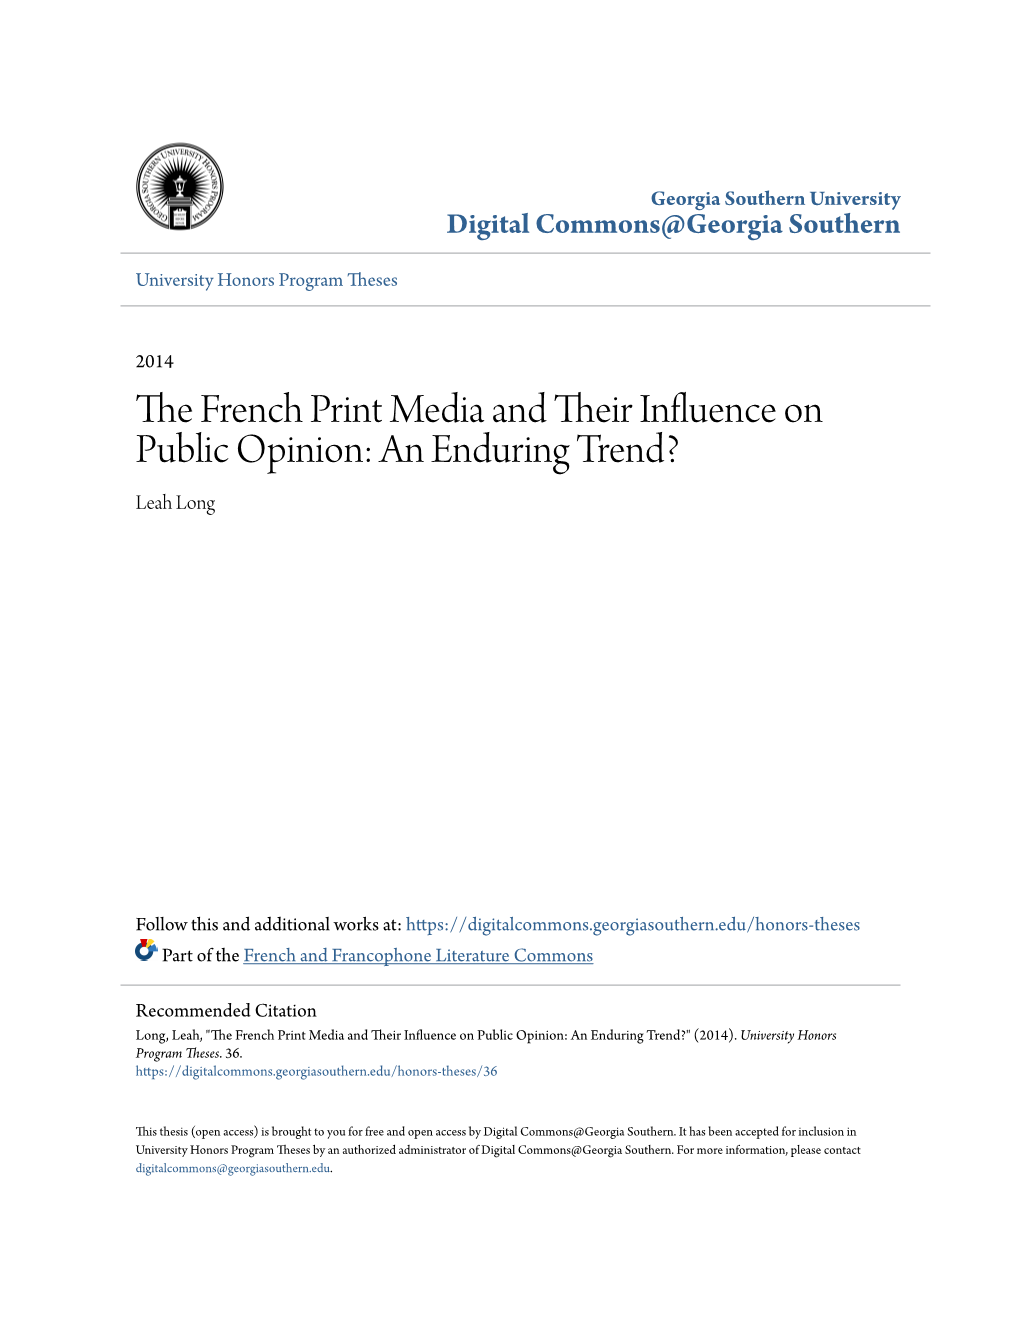 The French Print Media and Their Influence on Public Opinion: an Enduring Trend?